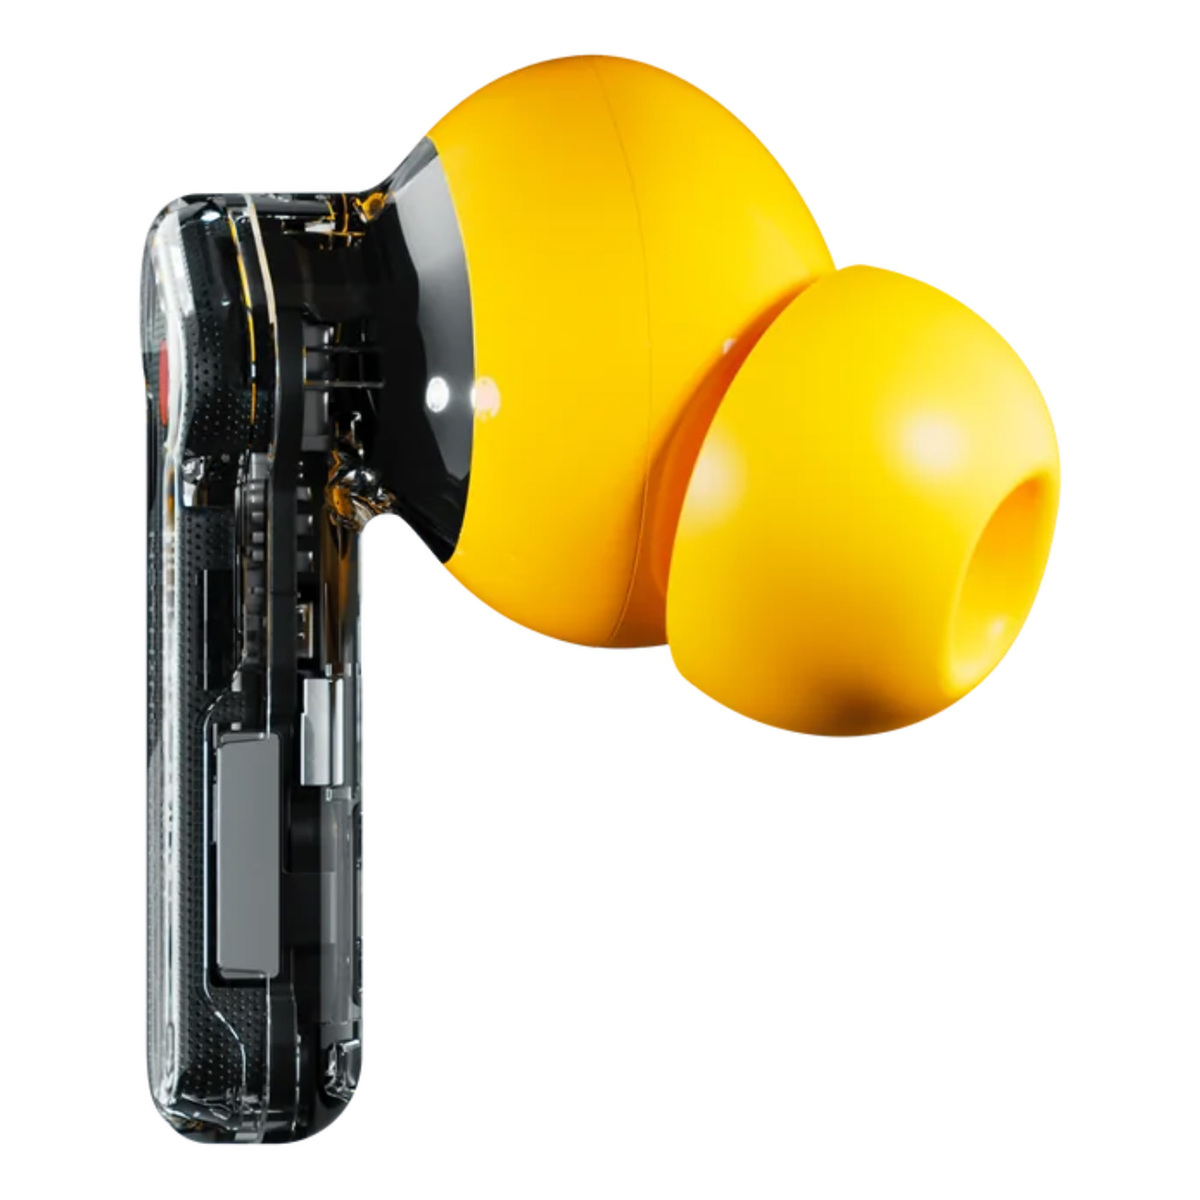 Nothing Ear(a) True Wireless Earbuds with Mic, Yellow, B162